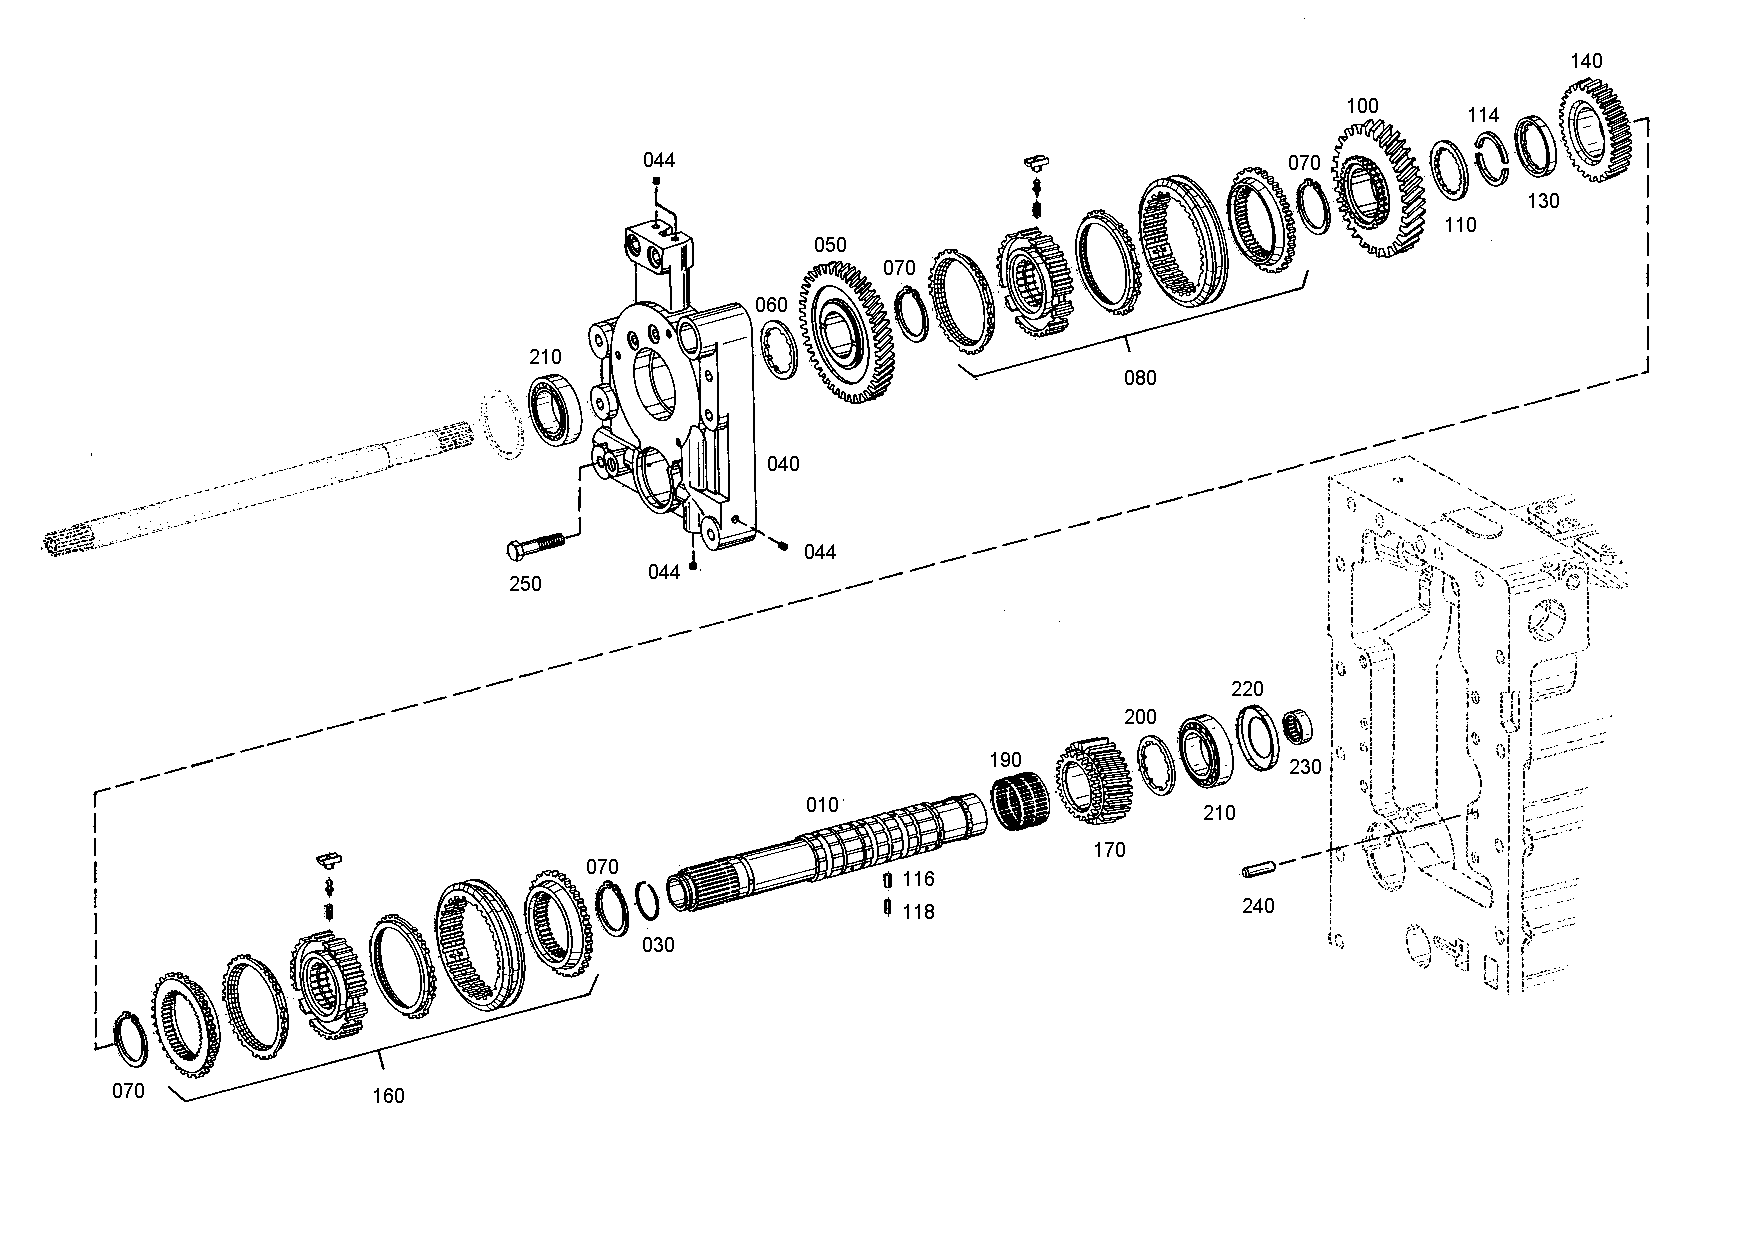 drawing for AGCO F184300020350 - FIXING PLATE (figure 1)